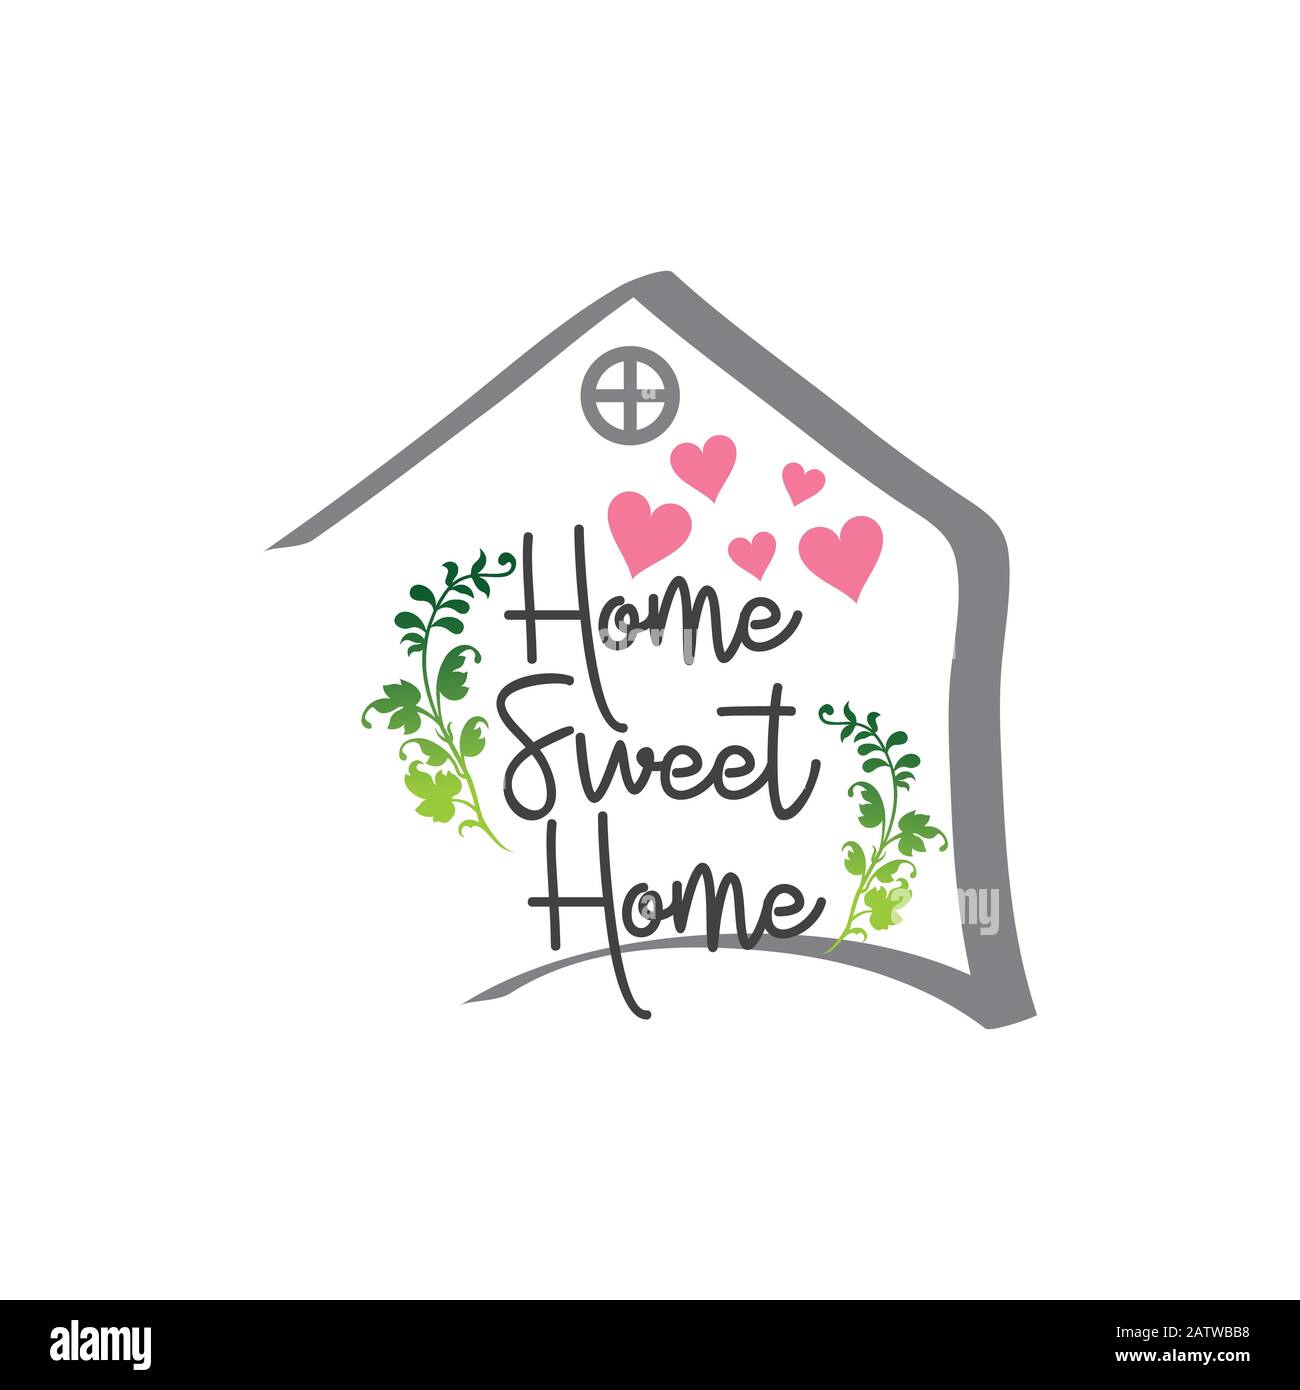 Home sweet home Stock Vector Images - Alamy